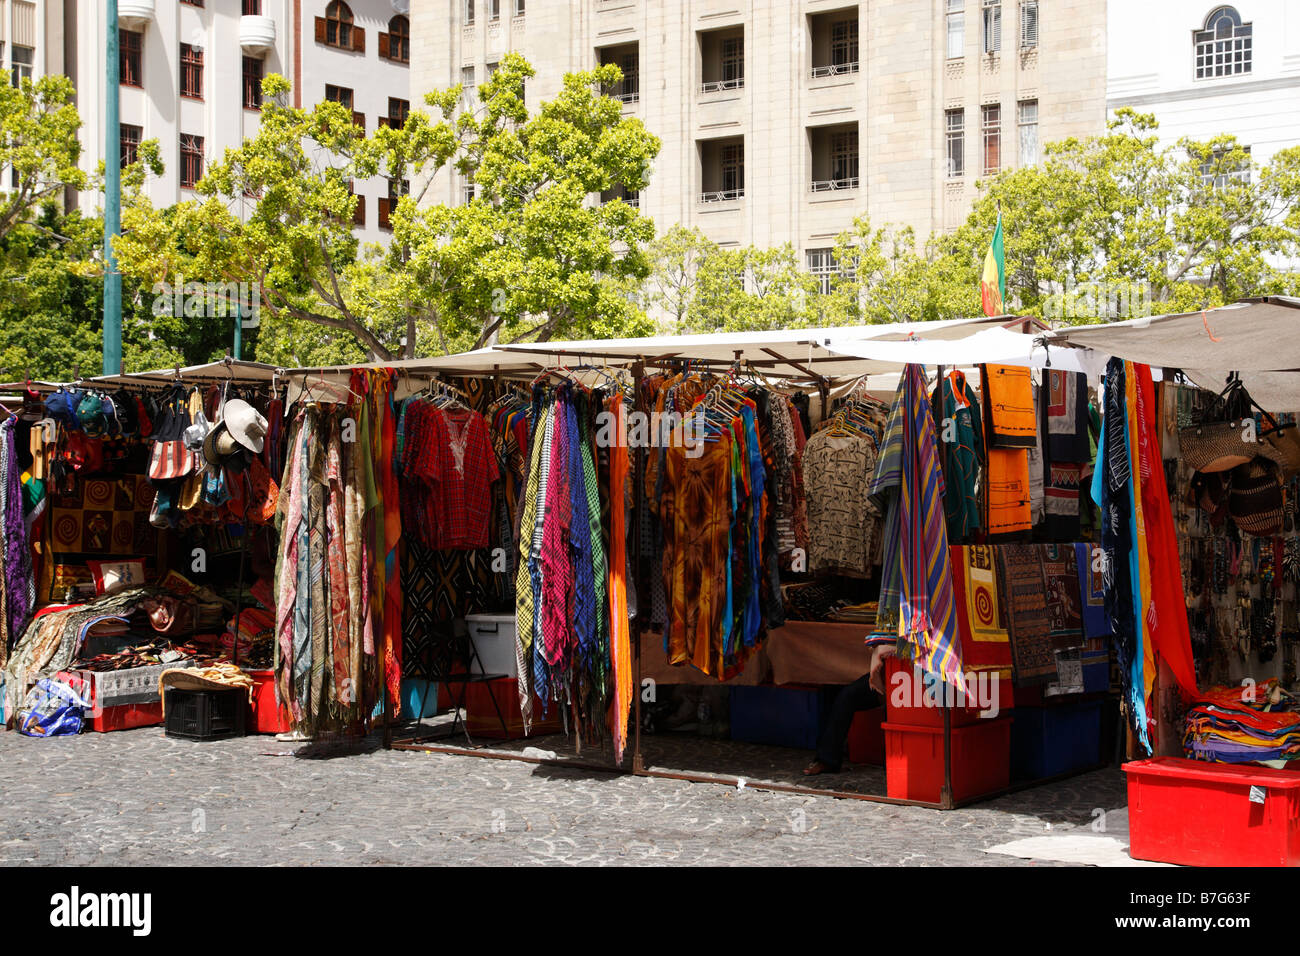 market stalls selling local crafts greenmarket square cape town south africa Stock Photo